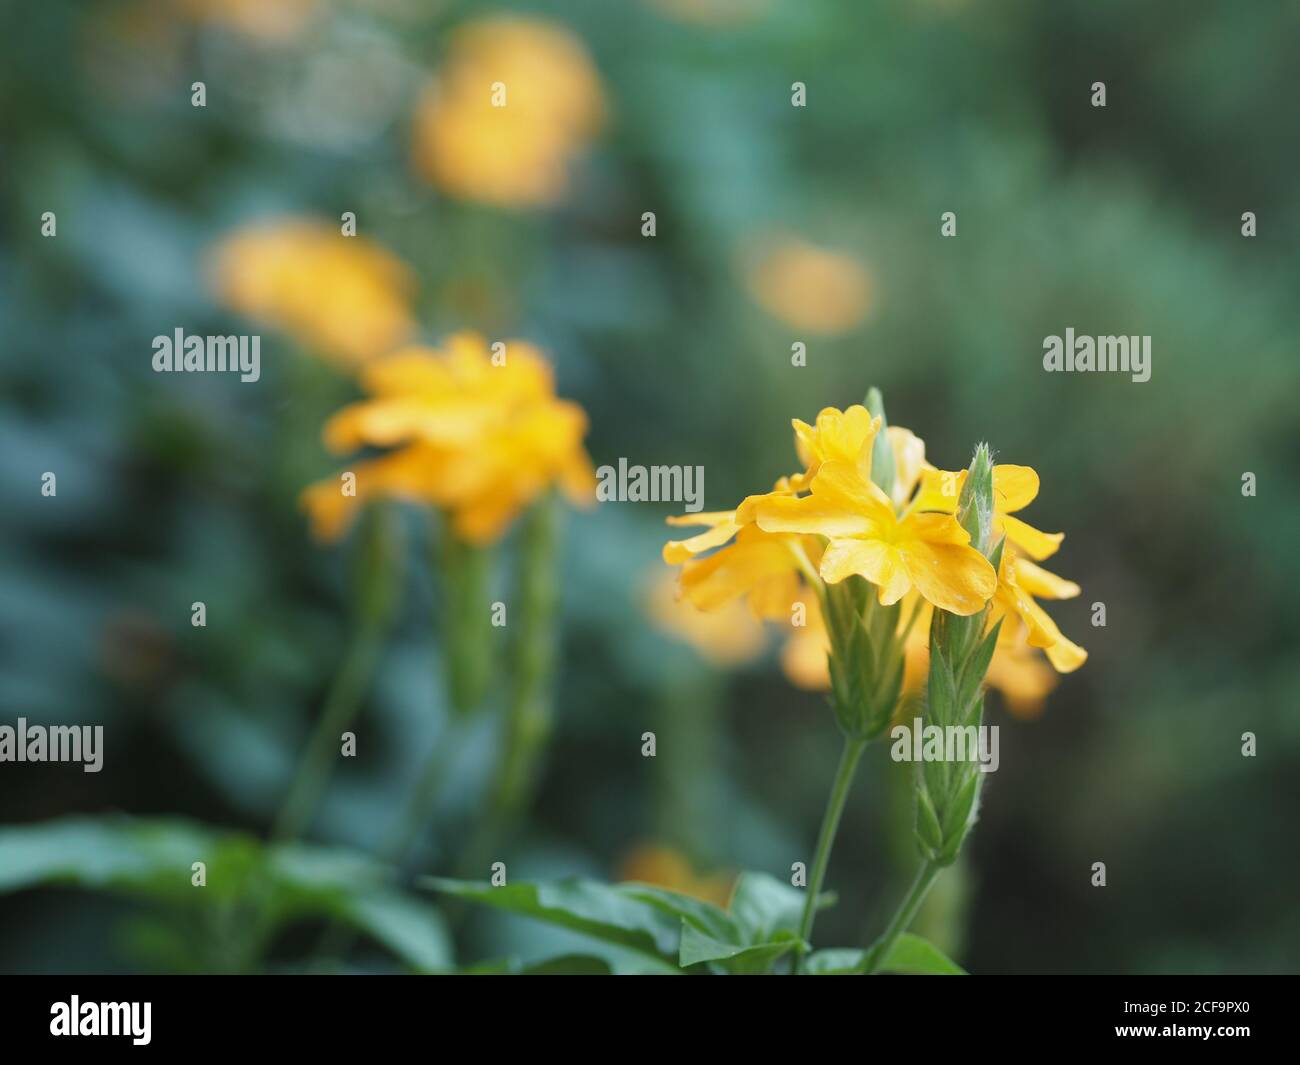 Yellow flower Aphelandra crossandra, Acanthaceae family blooming in garden on blurred nature background Stock Photo